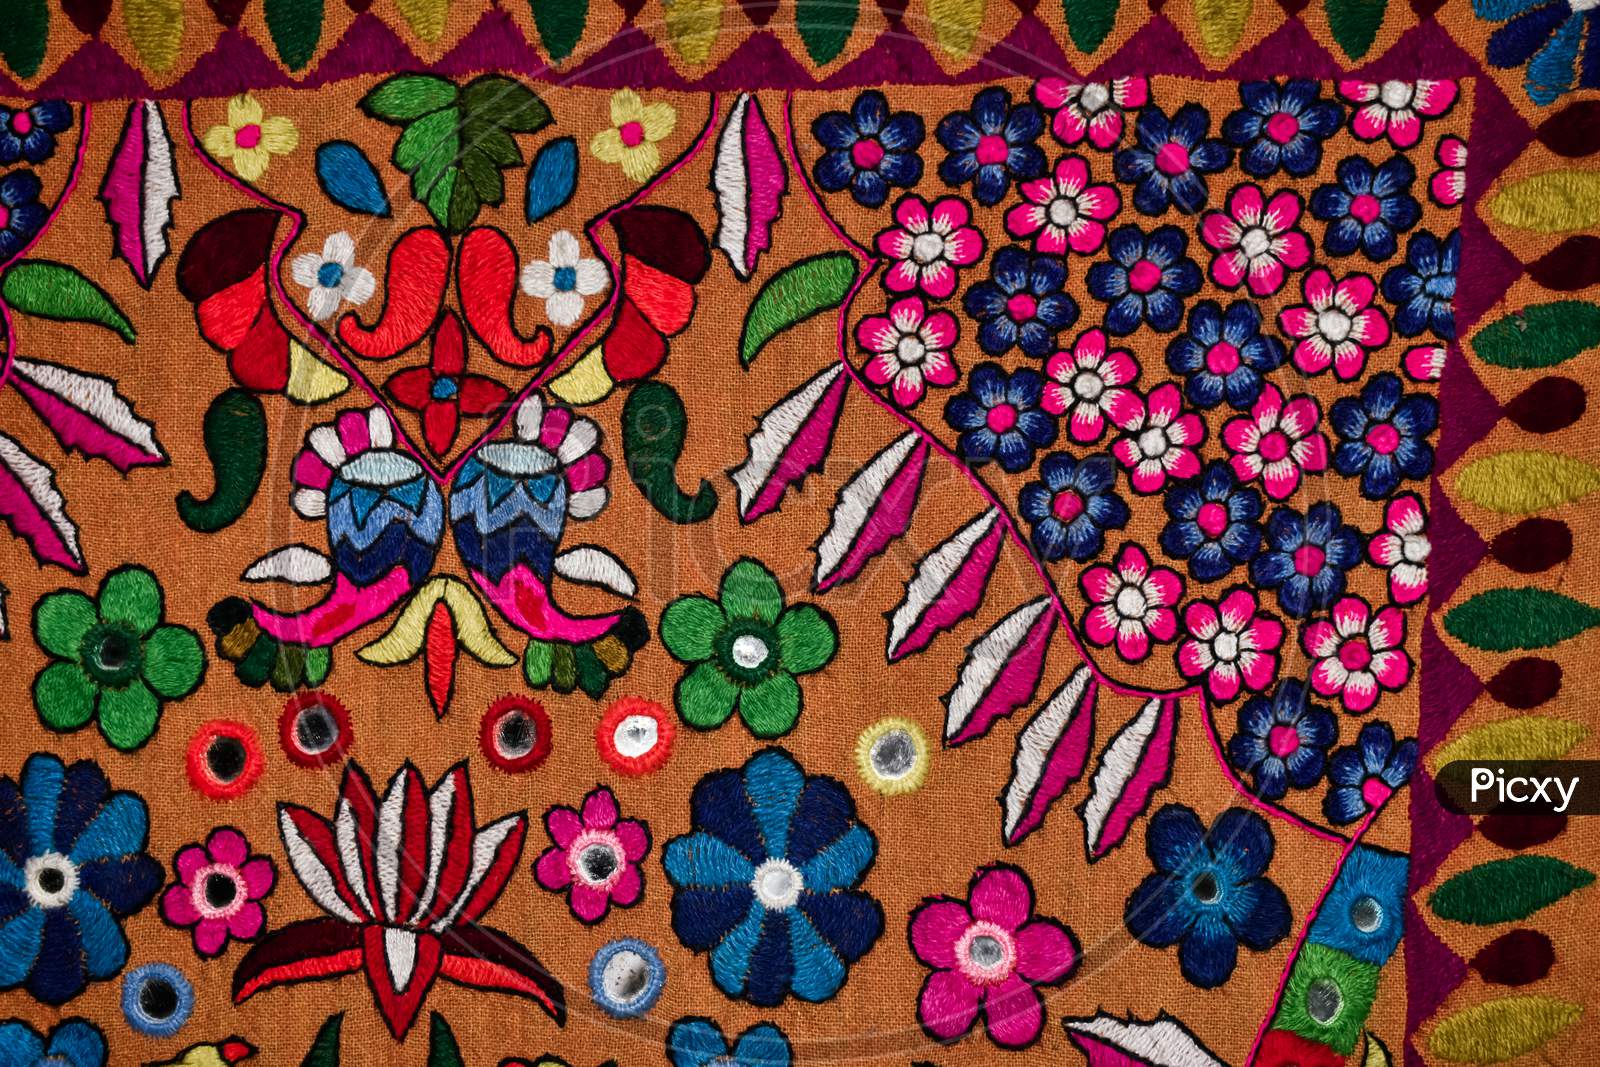 Background Colorful Image Of Hand Made Flower Design.